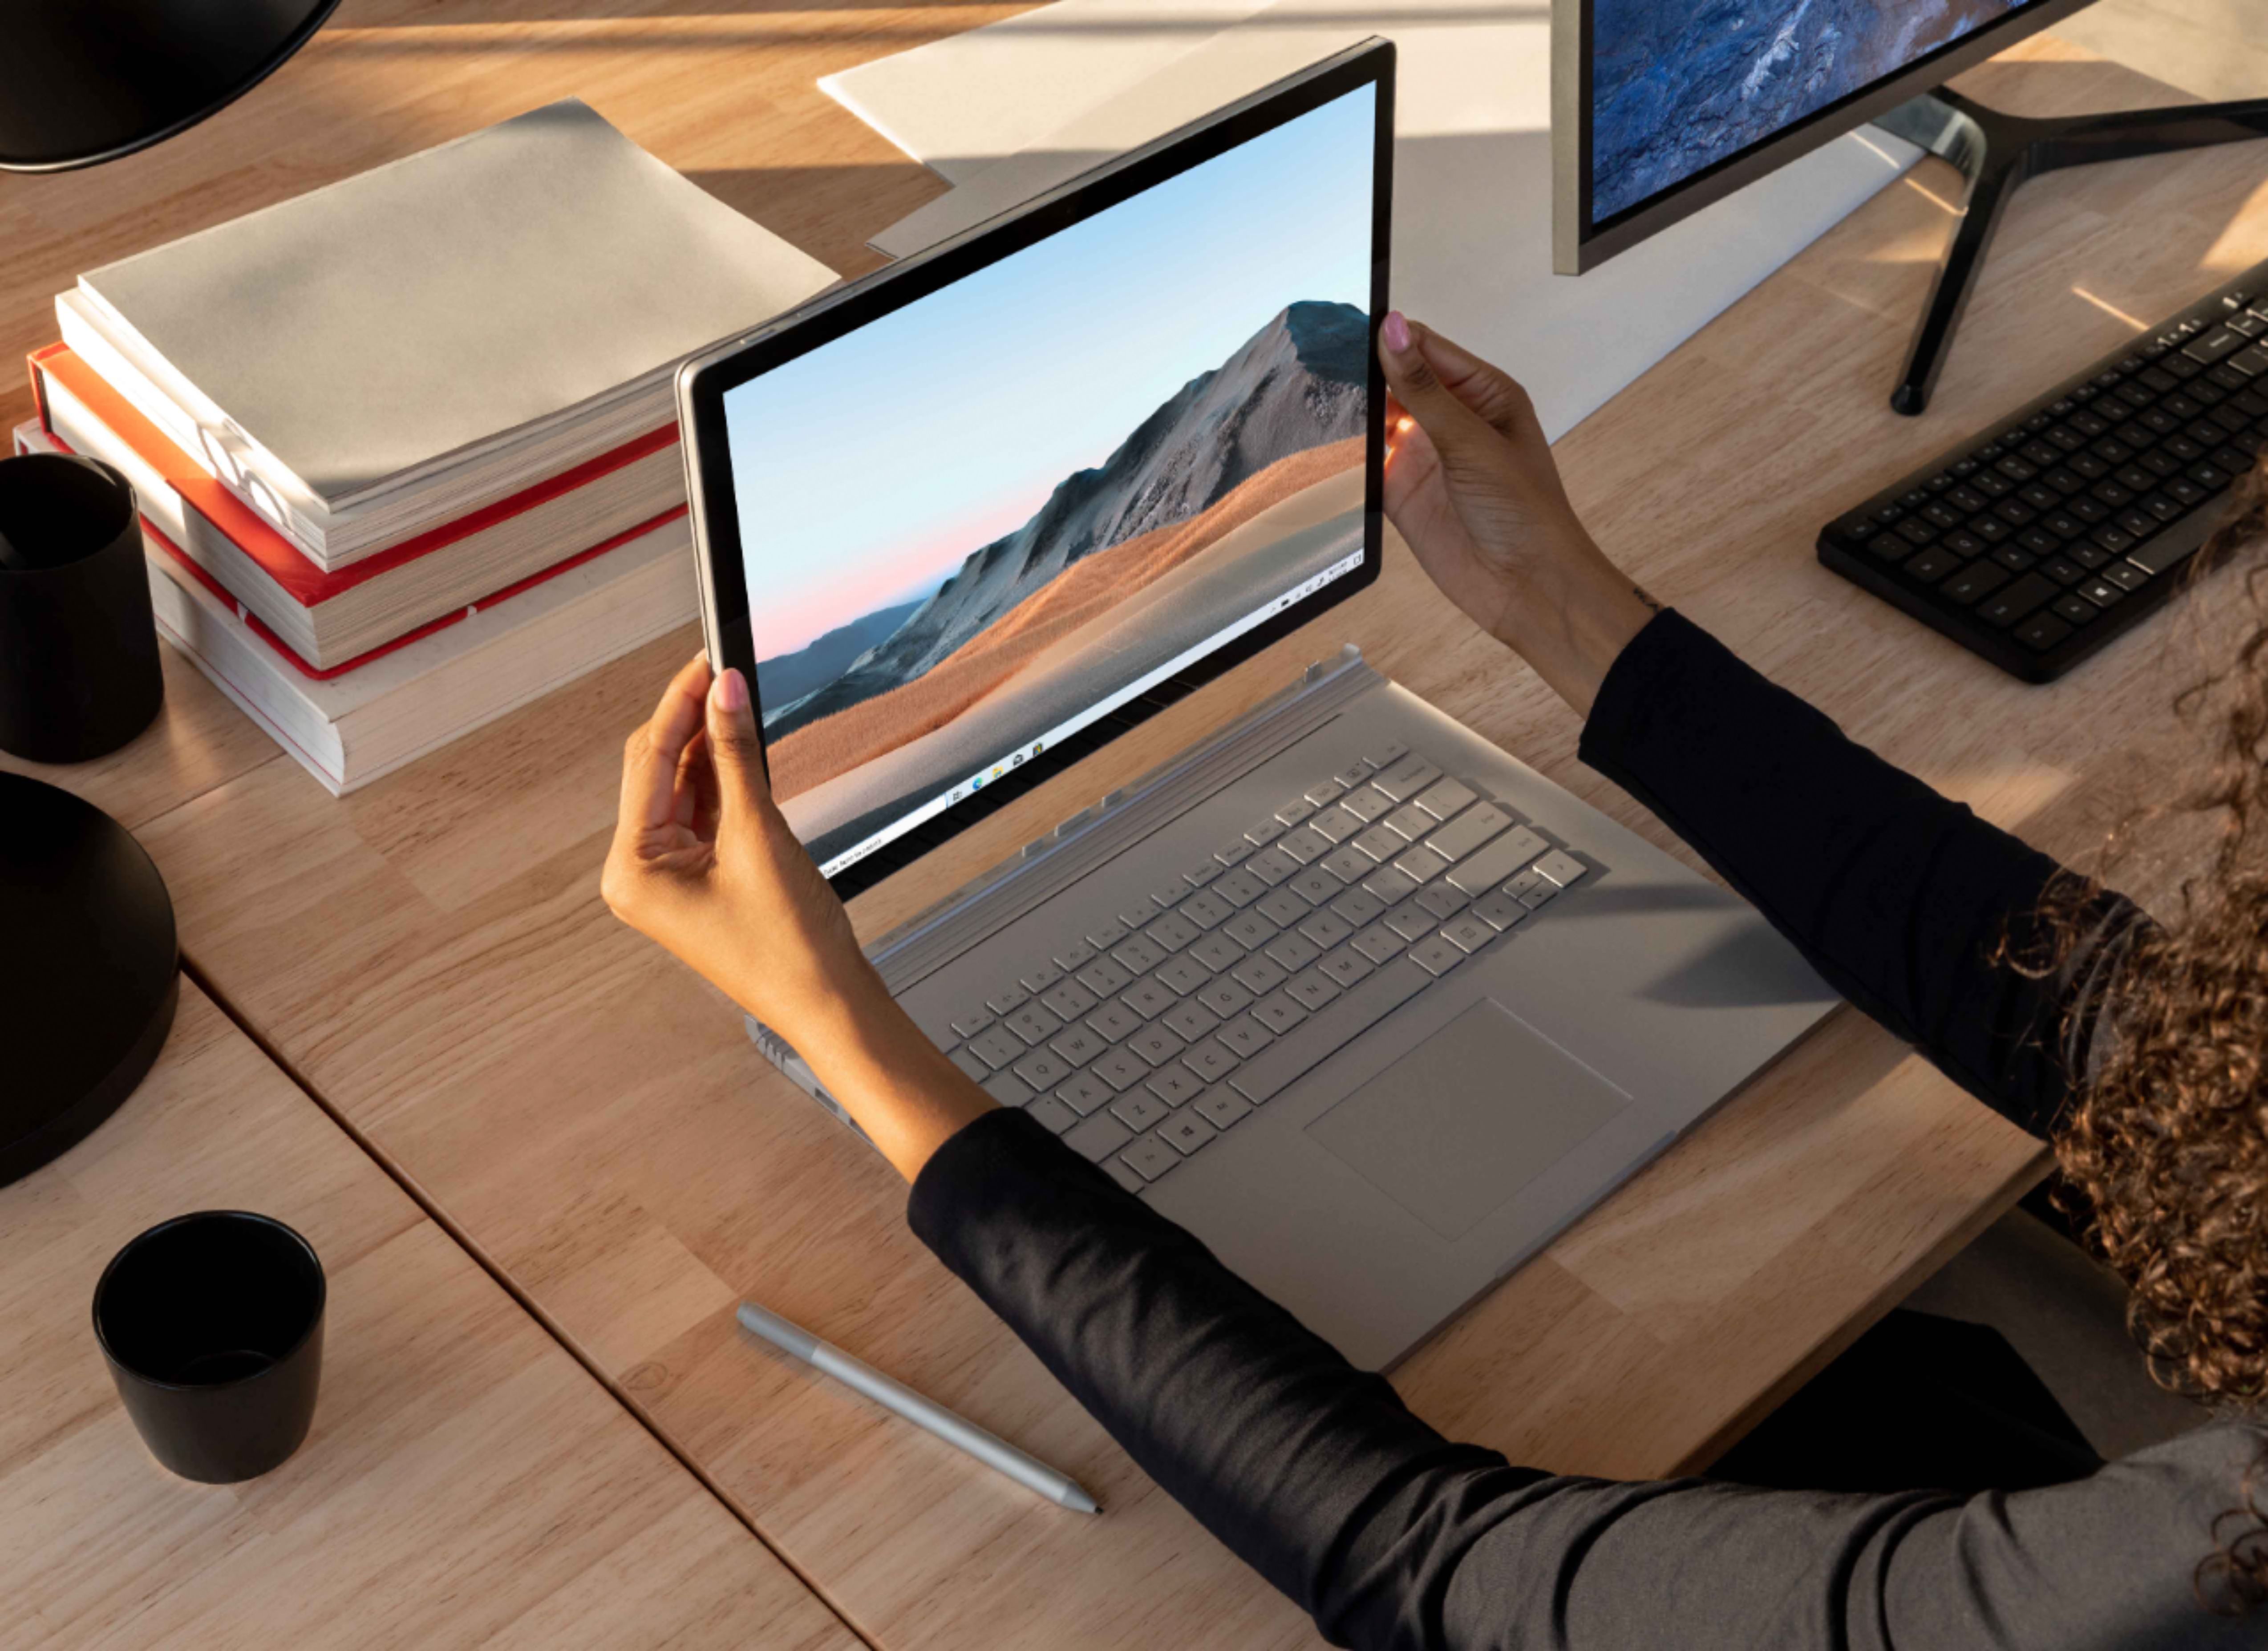 Best Buy: Microsoft Surface Book 3 15